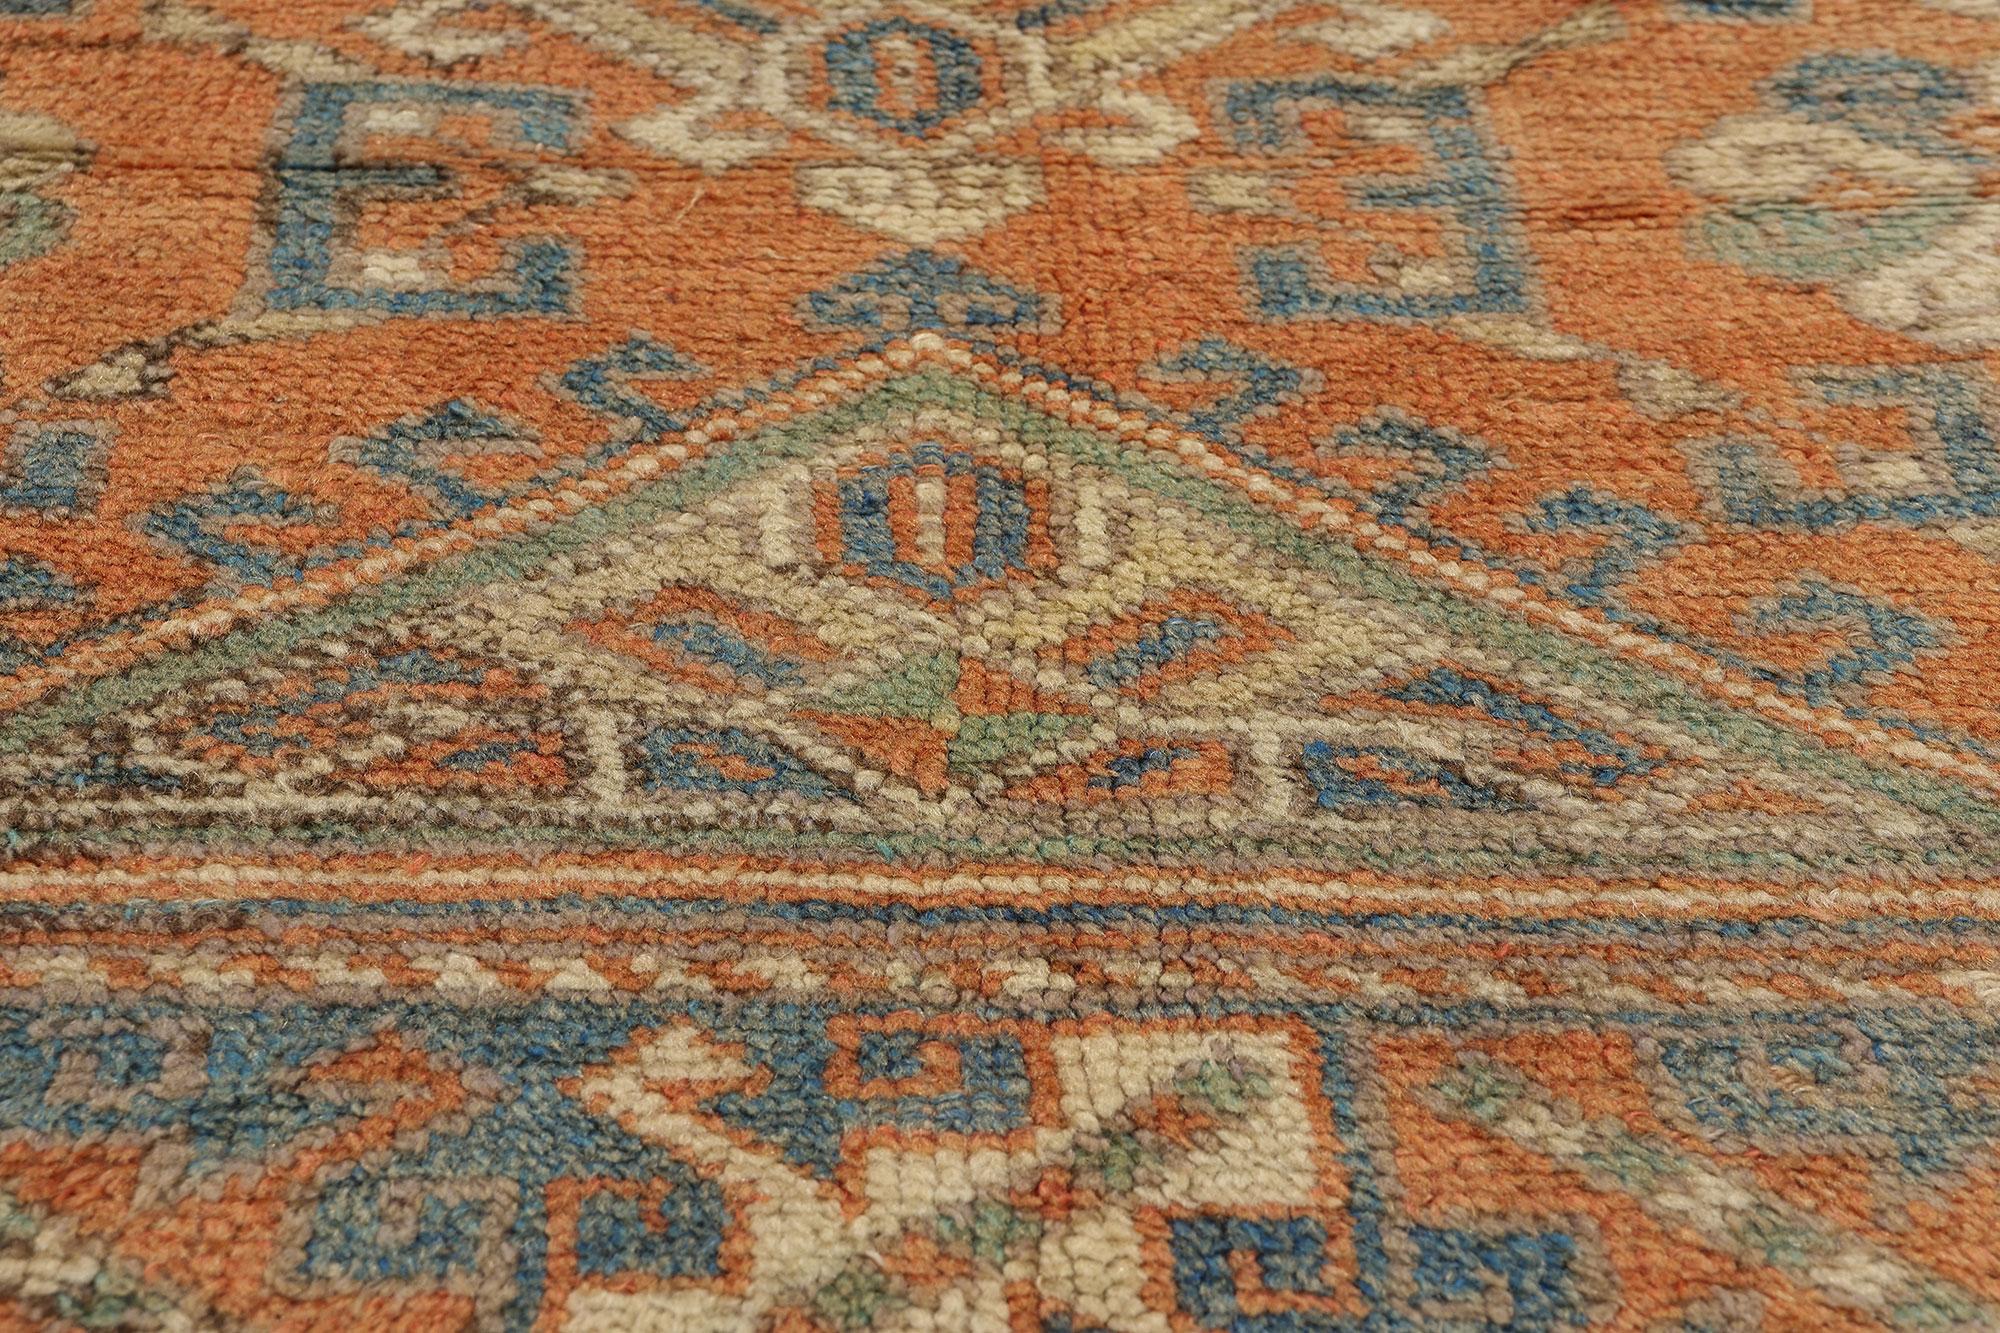 Earth-Tone Vintage Turkish Oushak Rug In Good Condition For Sale In Dallas, TX